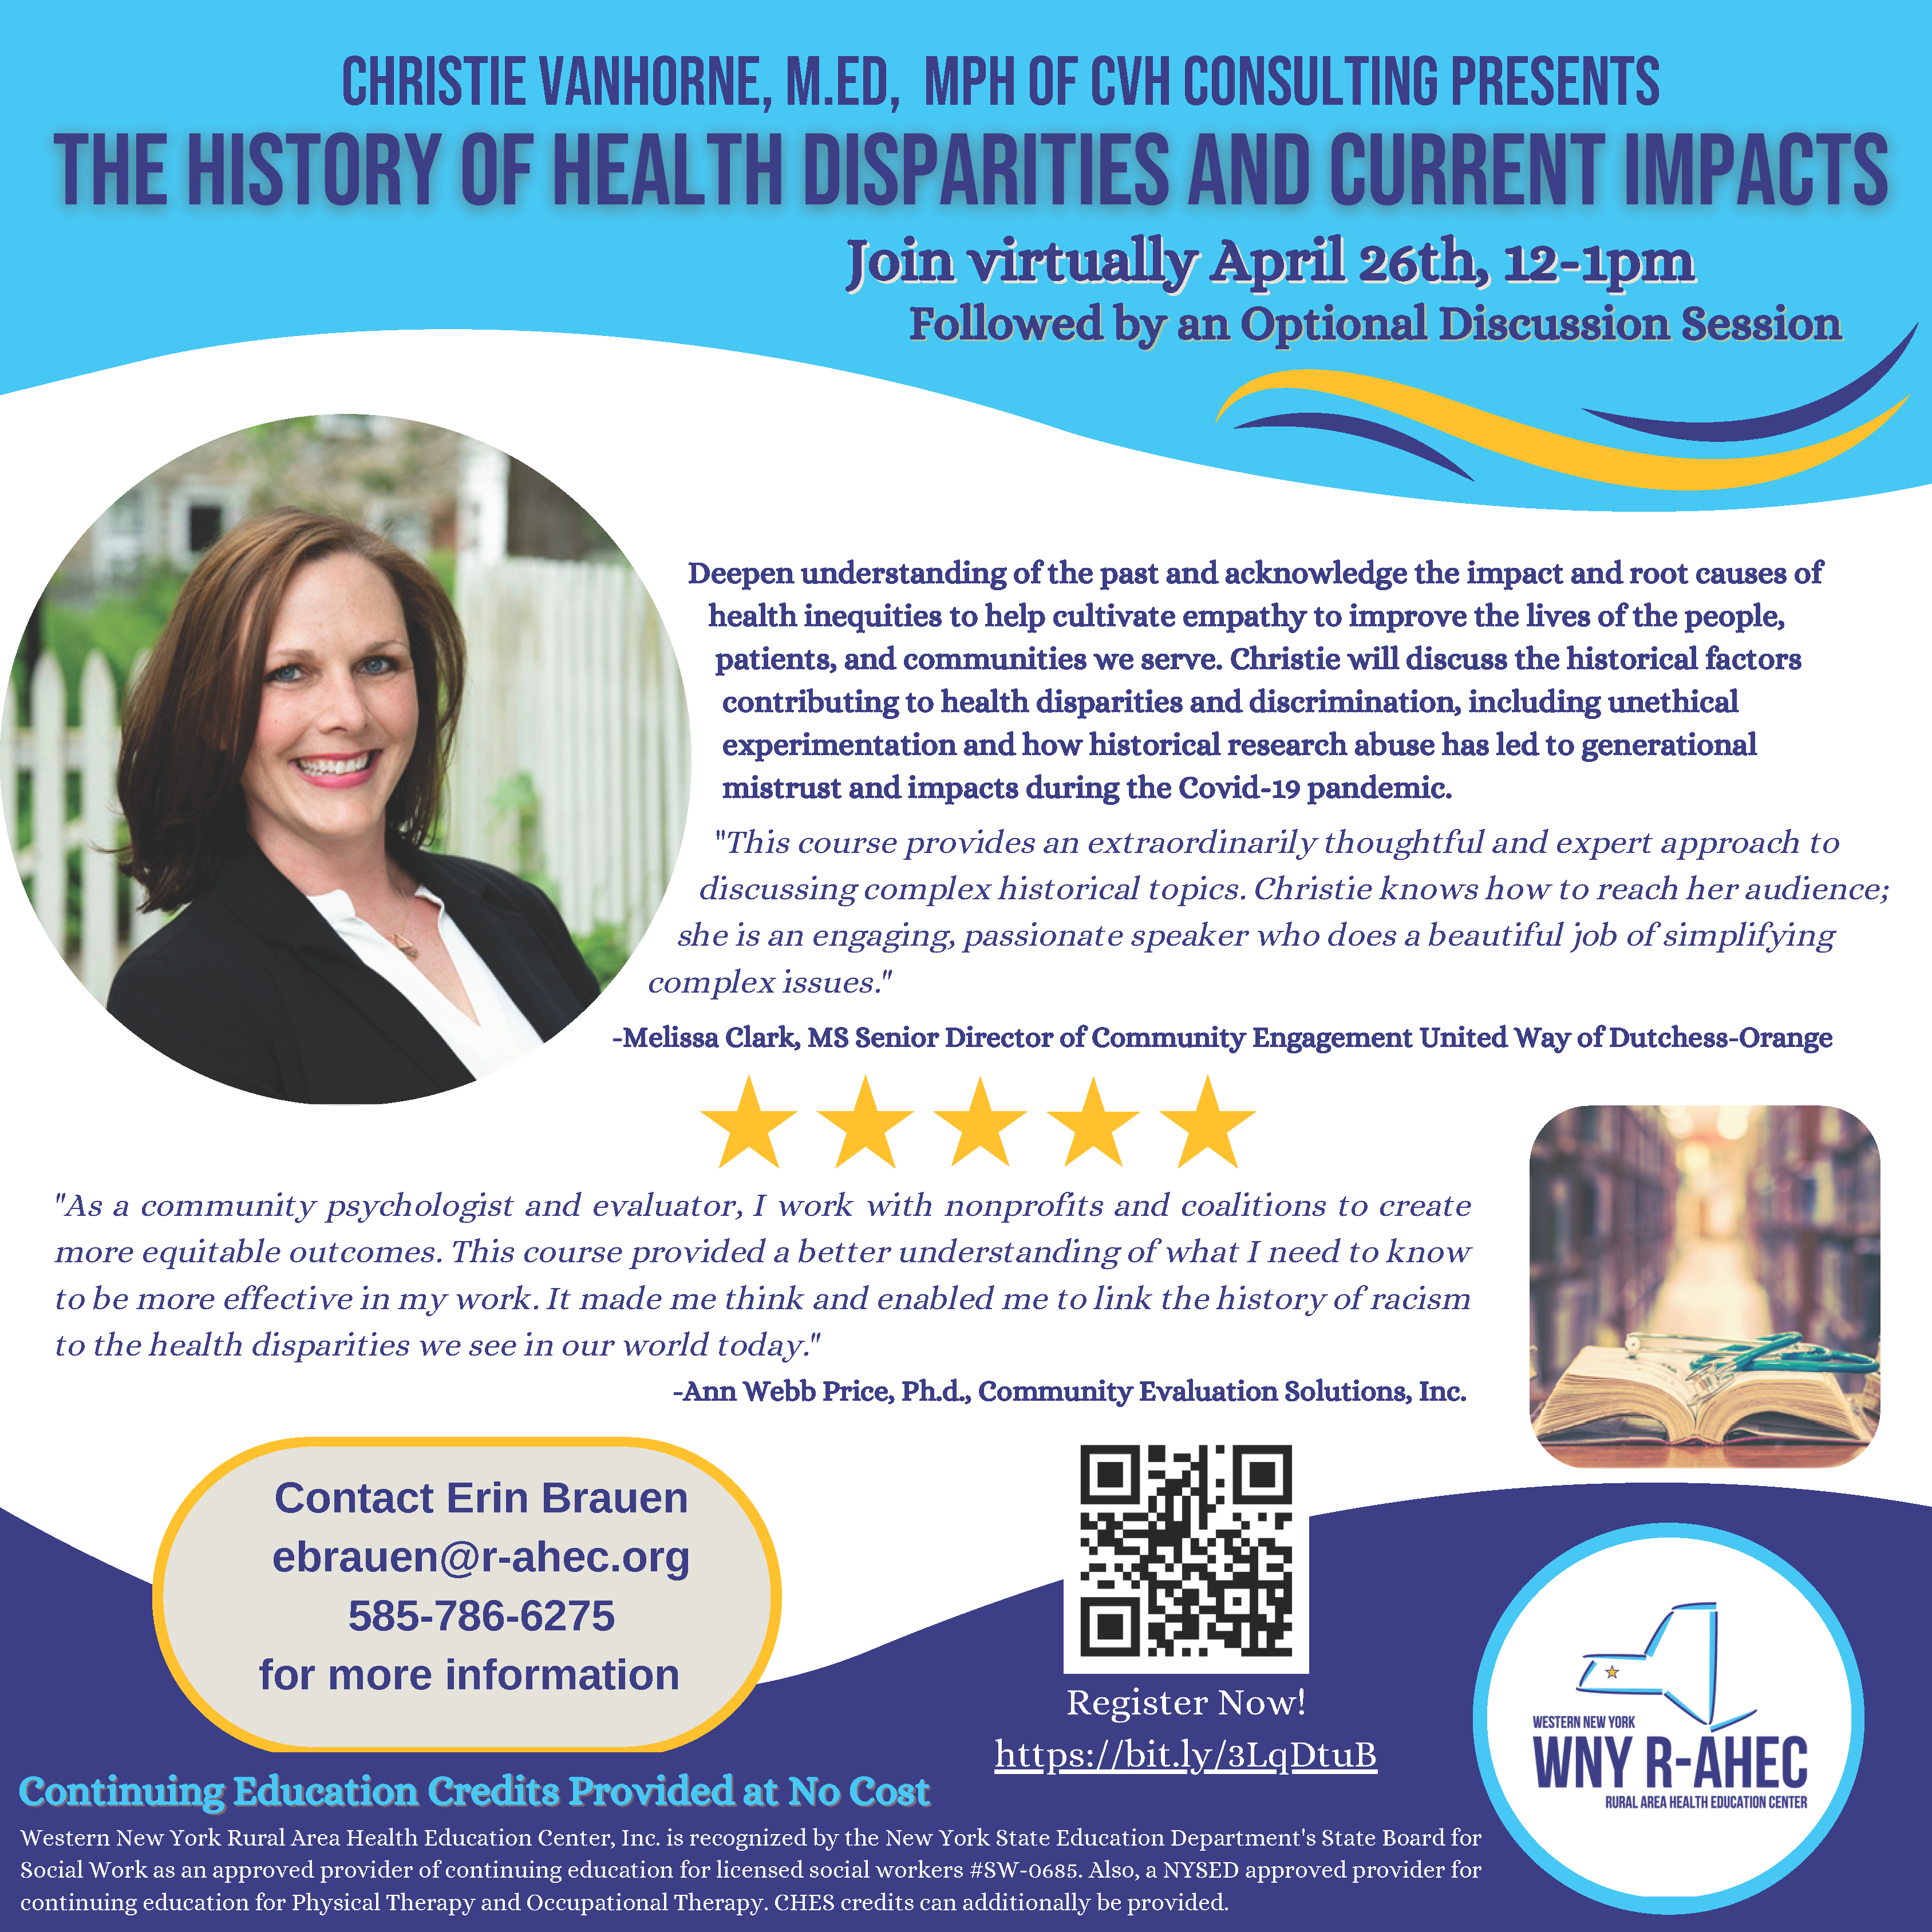 The History of Health Disparities and Current Impacts